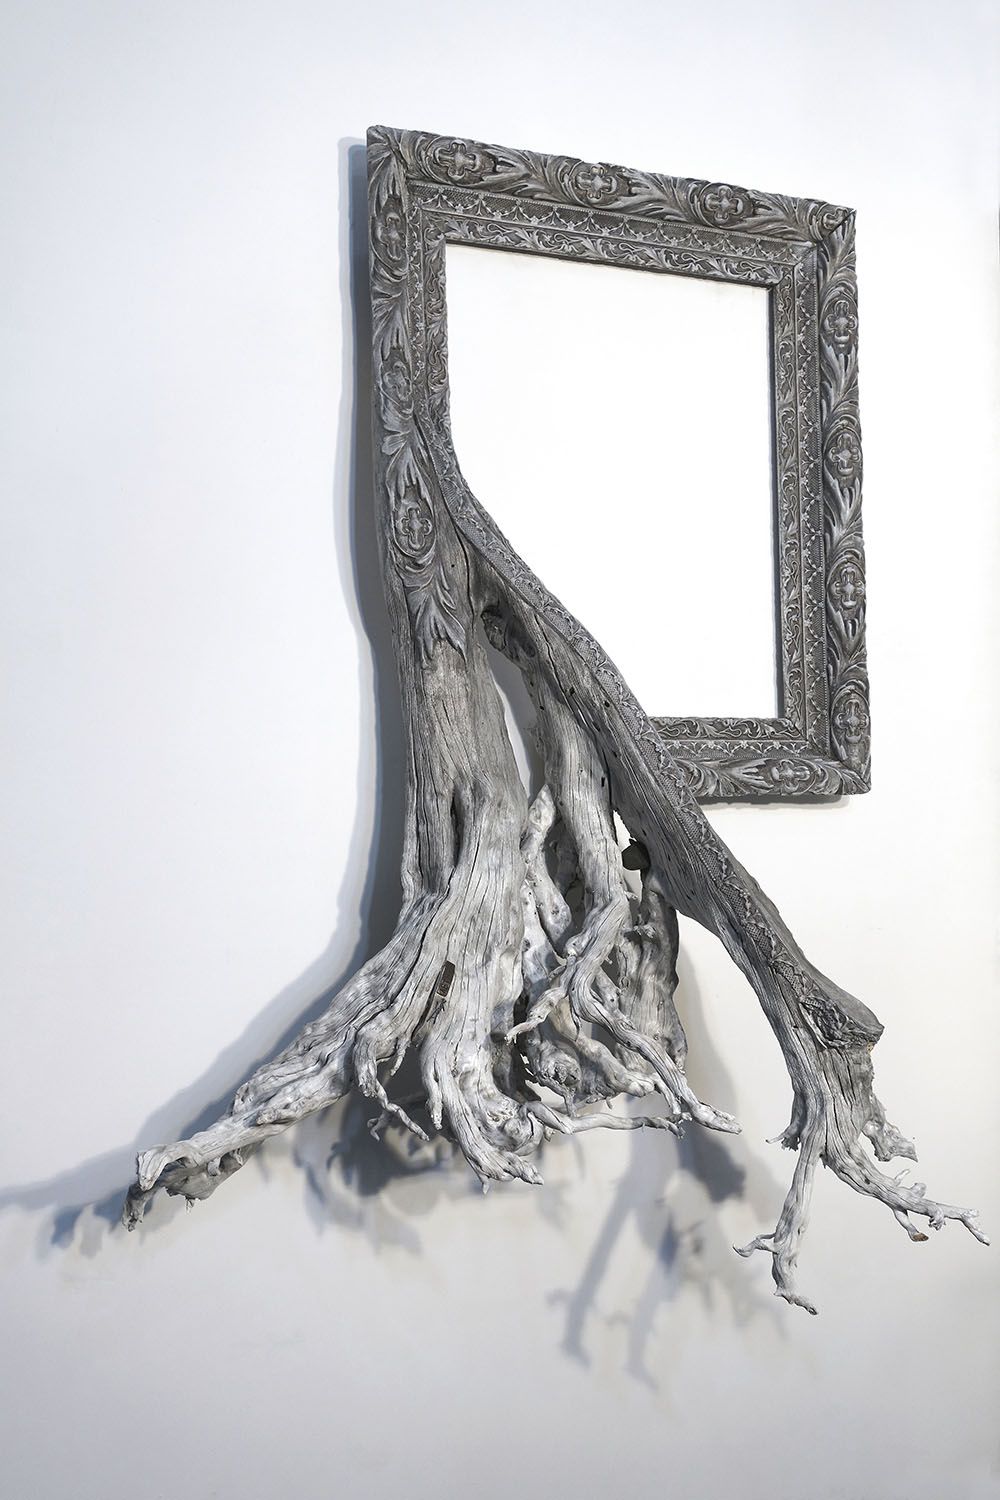 Tree Roots And Branches Fused With Ornate Picture Frames By Darryl Cox 1